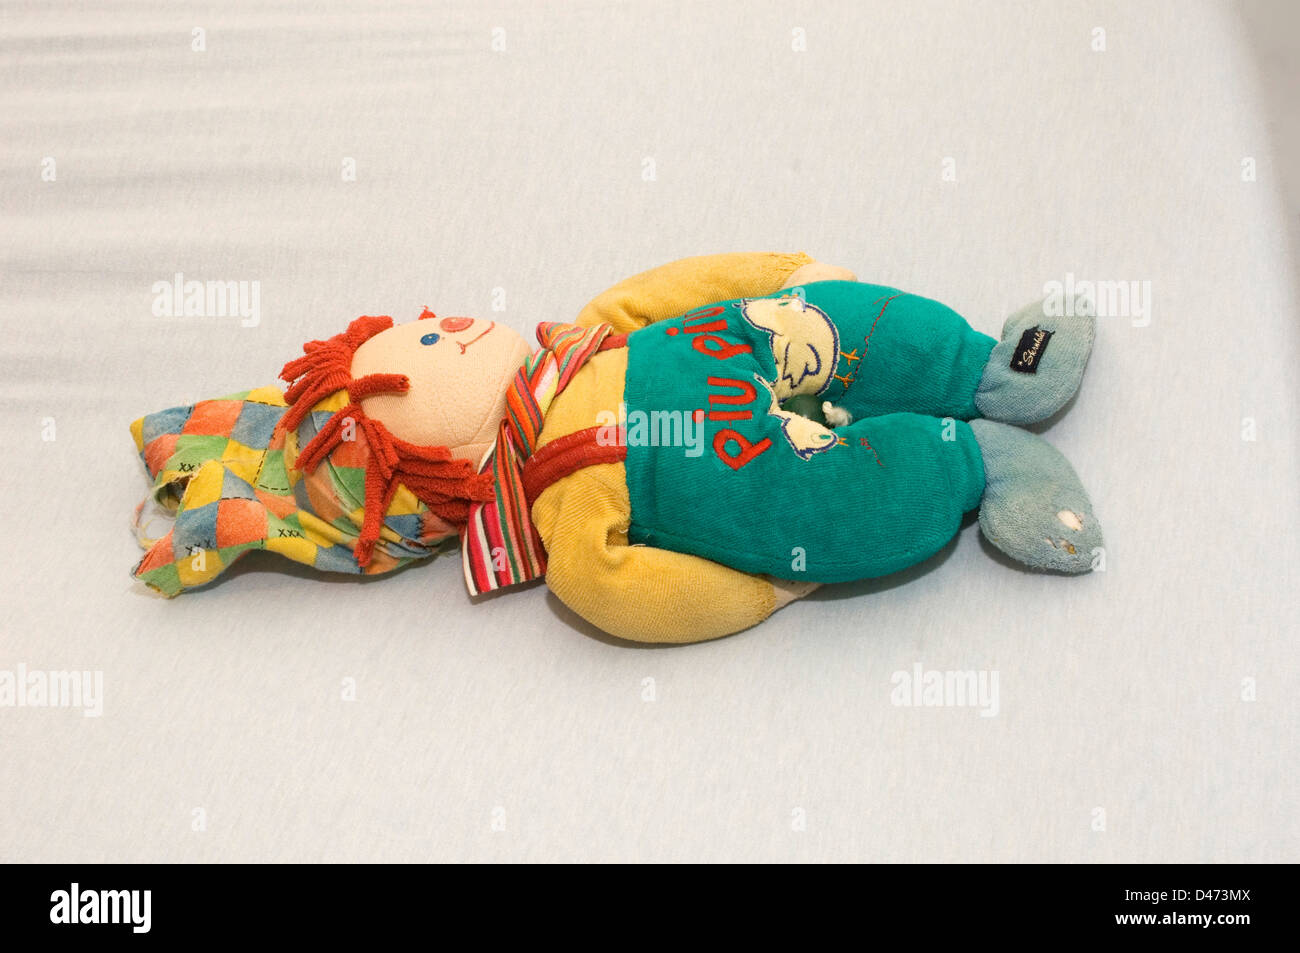 A child's cuddly toy left behind on a hospital bed while its owner was undergoing a medical procedure. Stock Photo